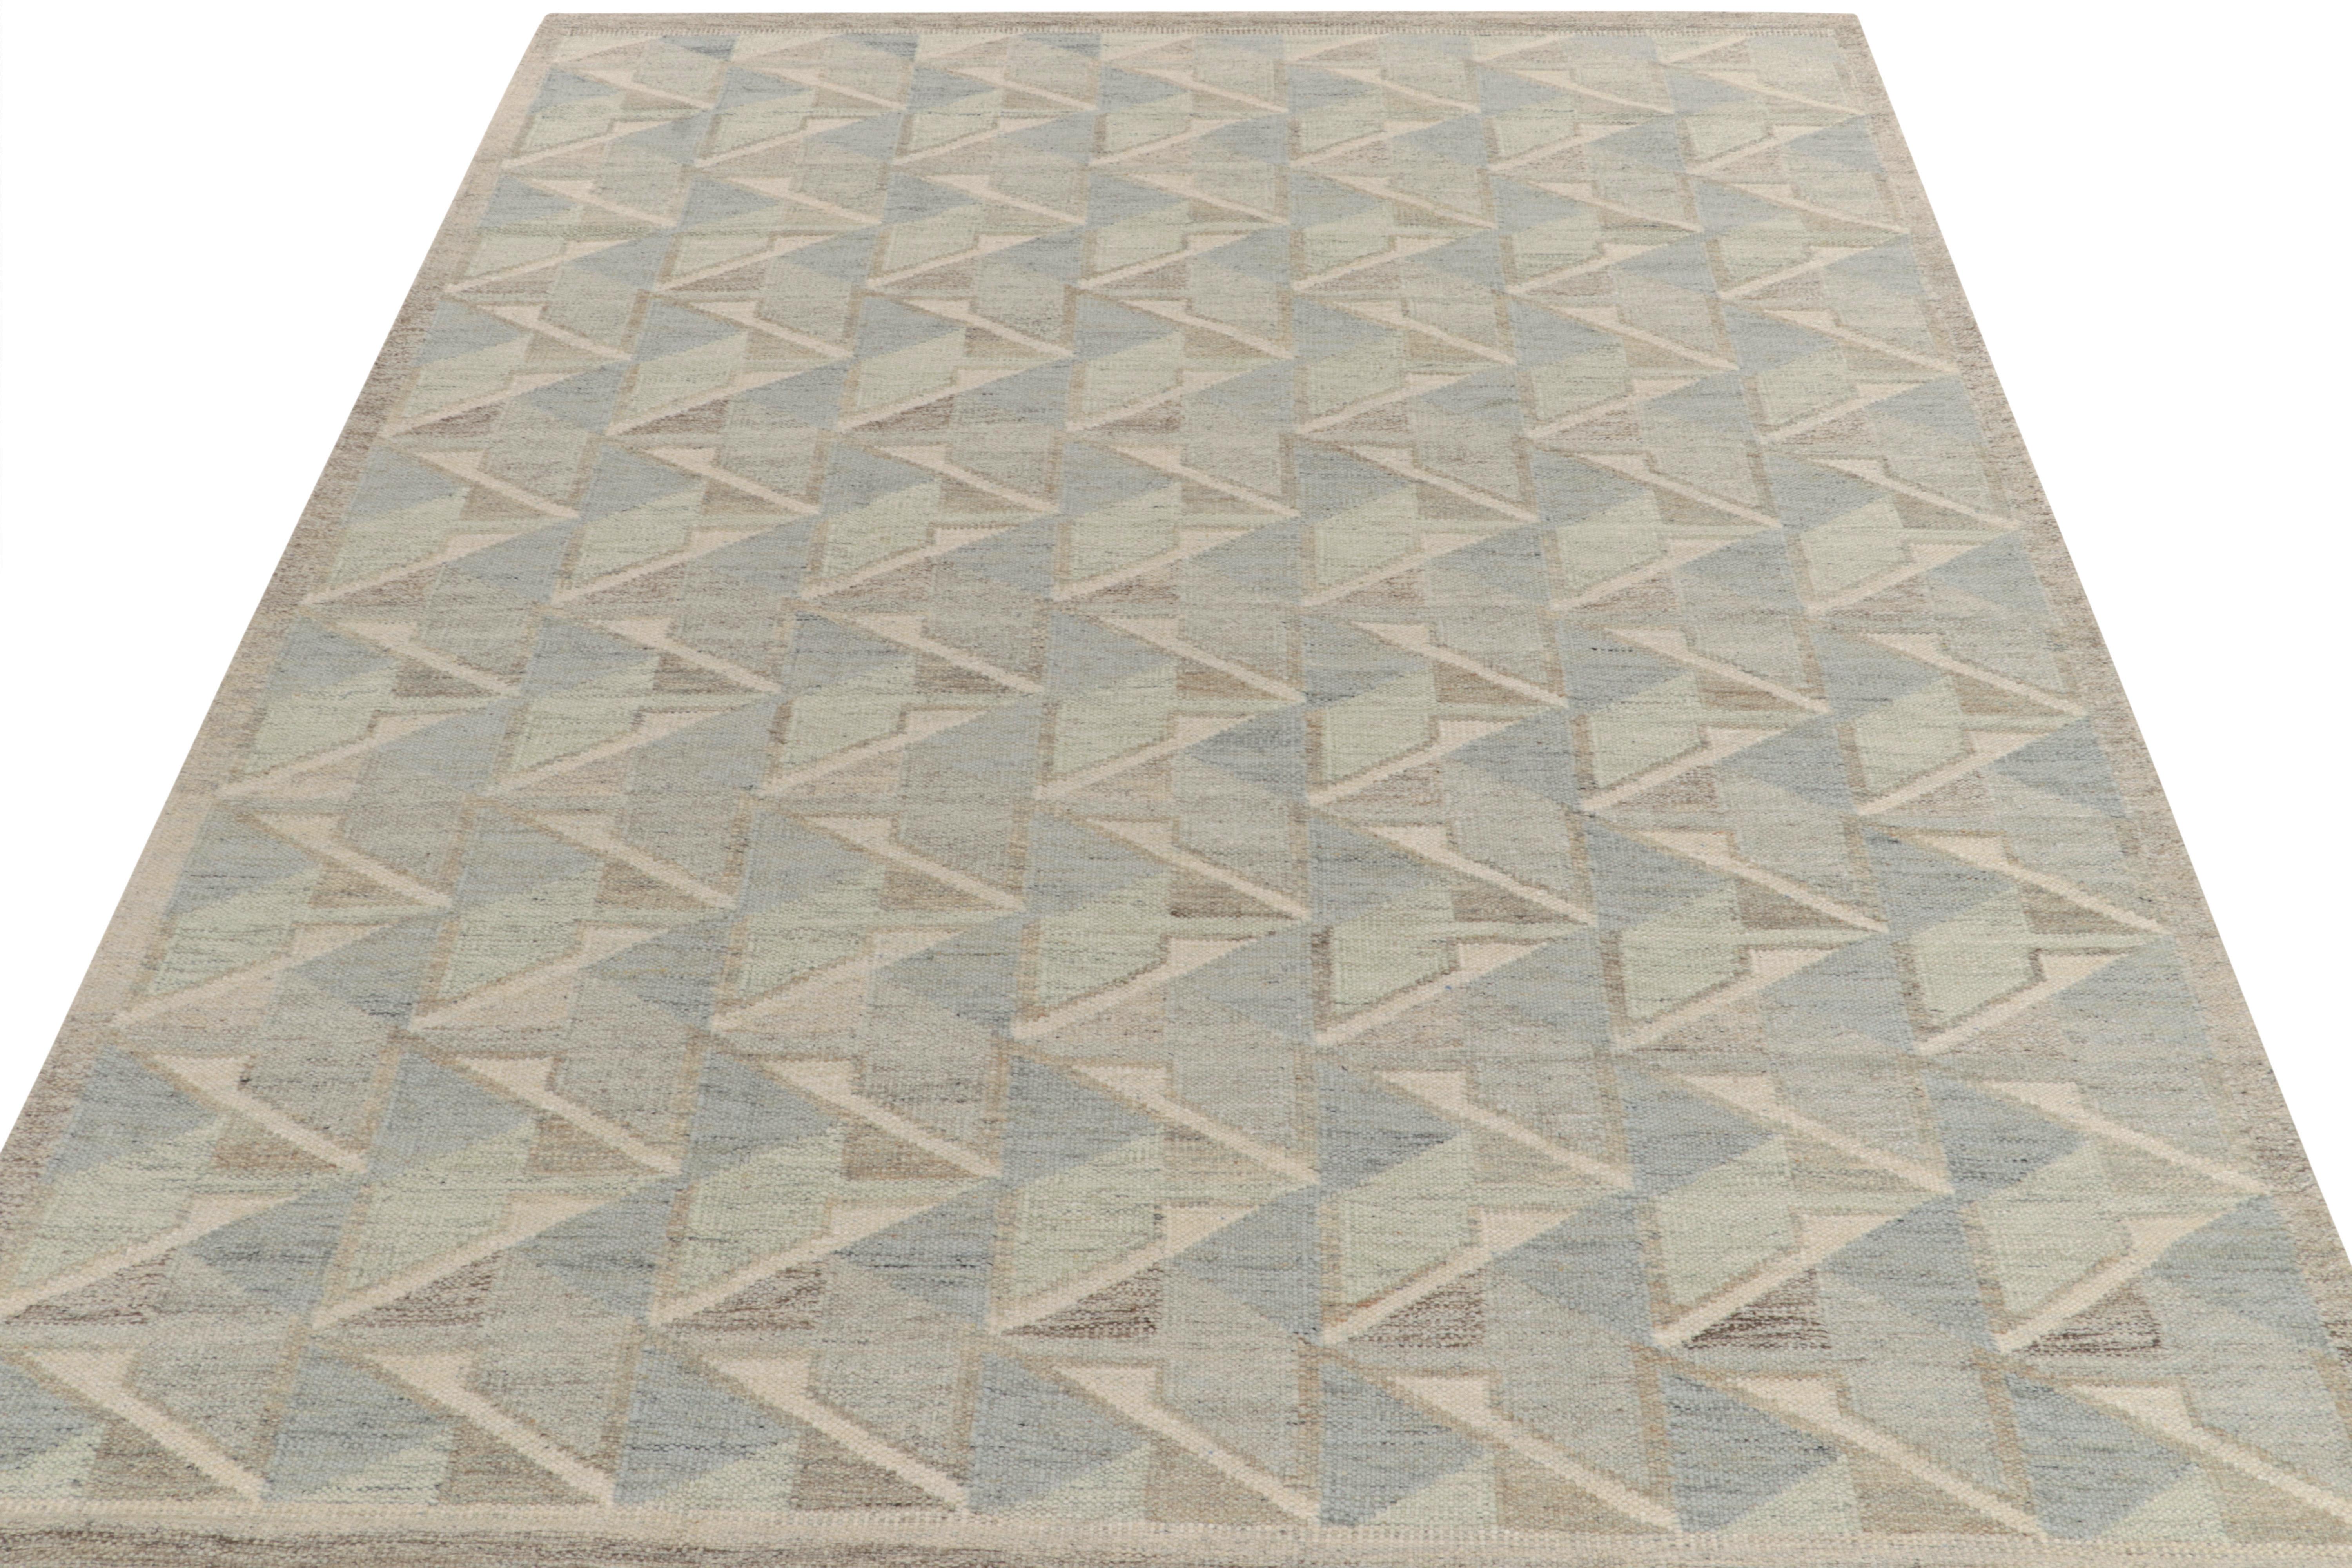 Rug & Kilim’s Scandinavian style kilim from our celebrated flat weave texture of the titular, award-winning collection. This 9x12 rug enjoys the finesse of Swedish aesthetics with a dextrous geometric pattern casting an 3D impression in subtle tones